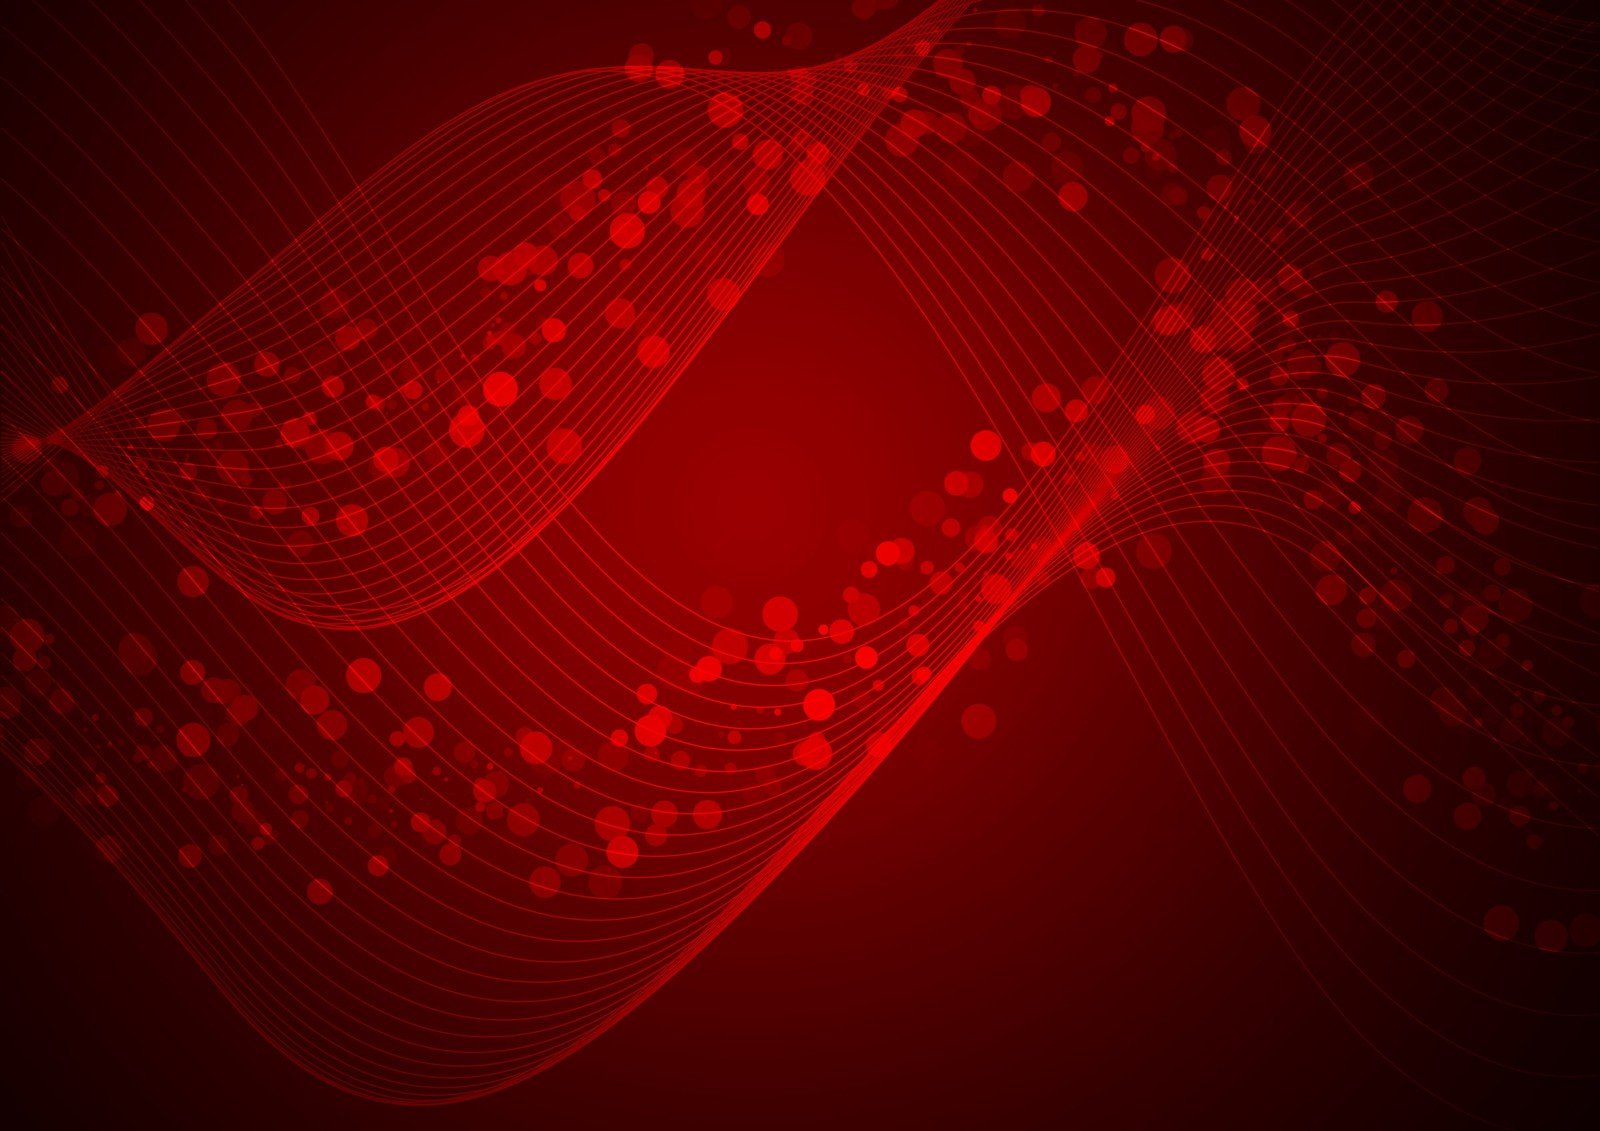 a background with red circles and a curved wavy design